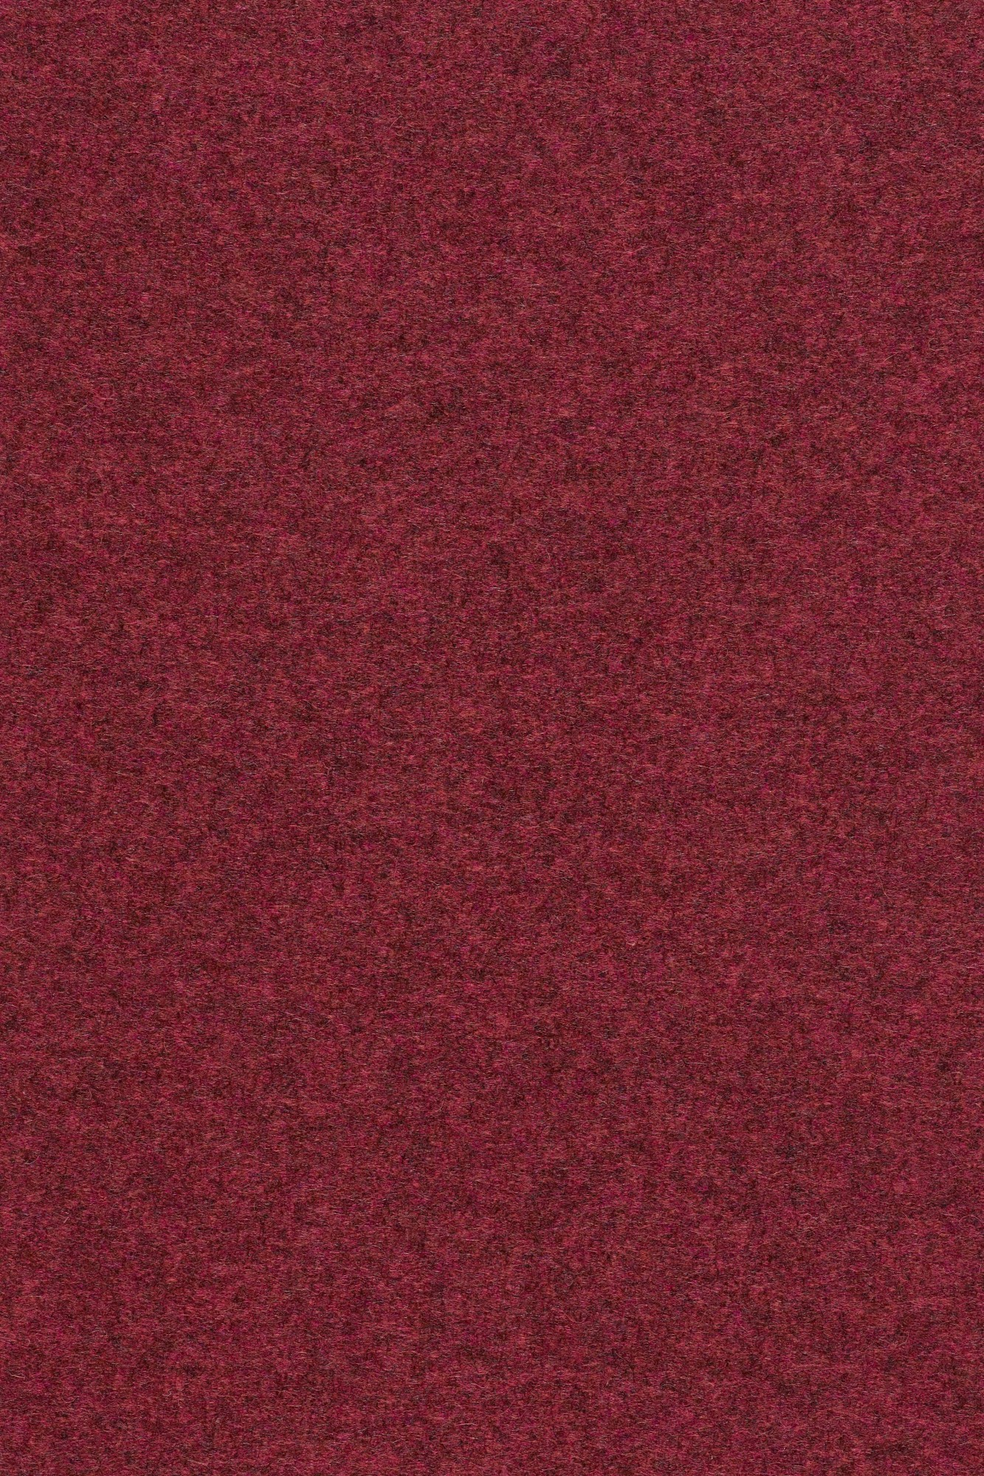 Fabric sample Divina MD 633 red